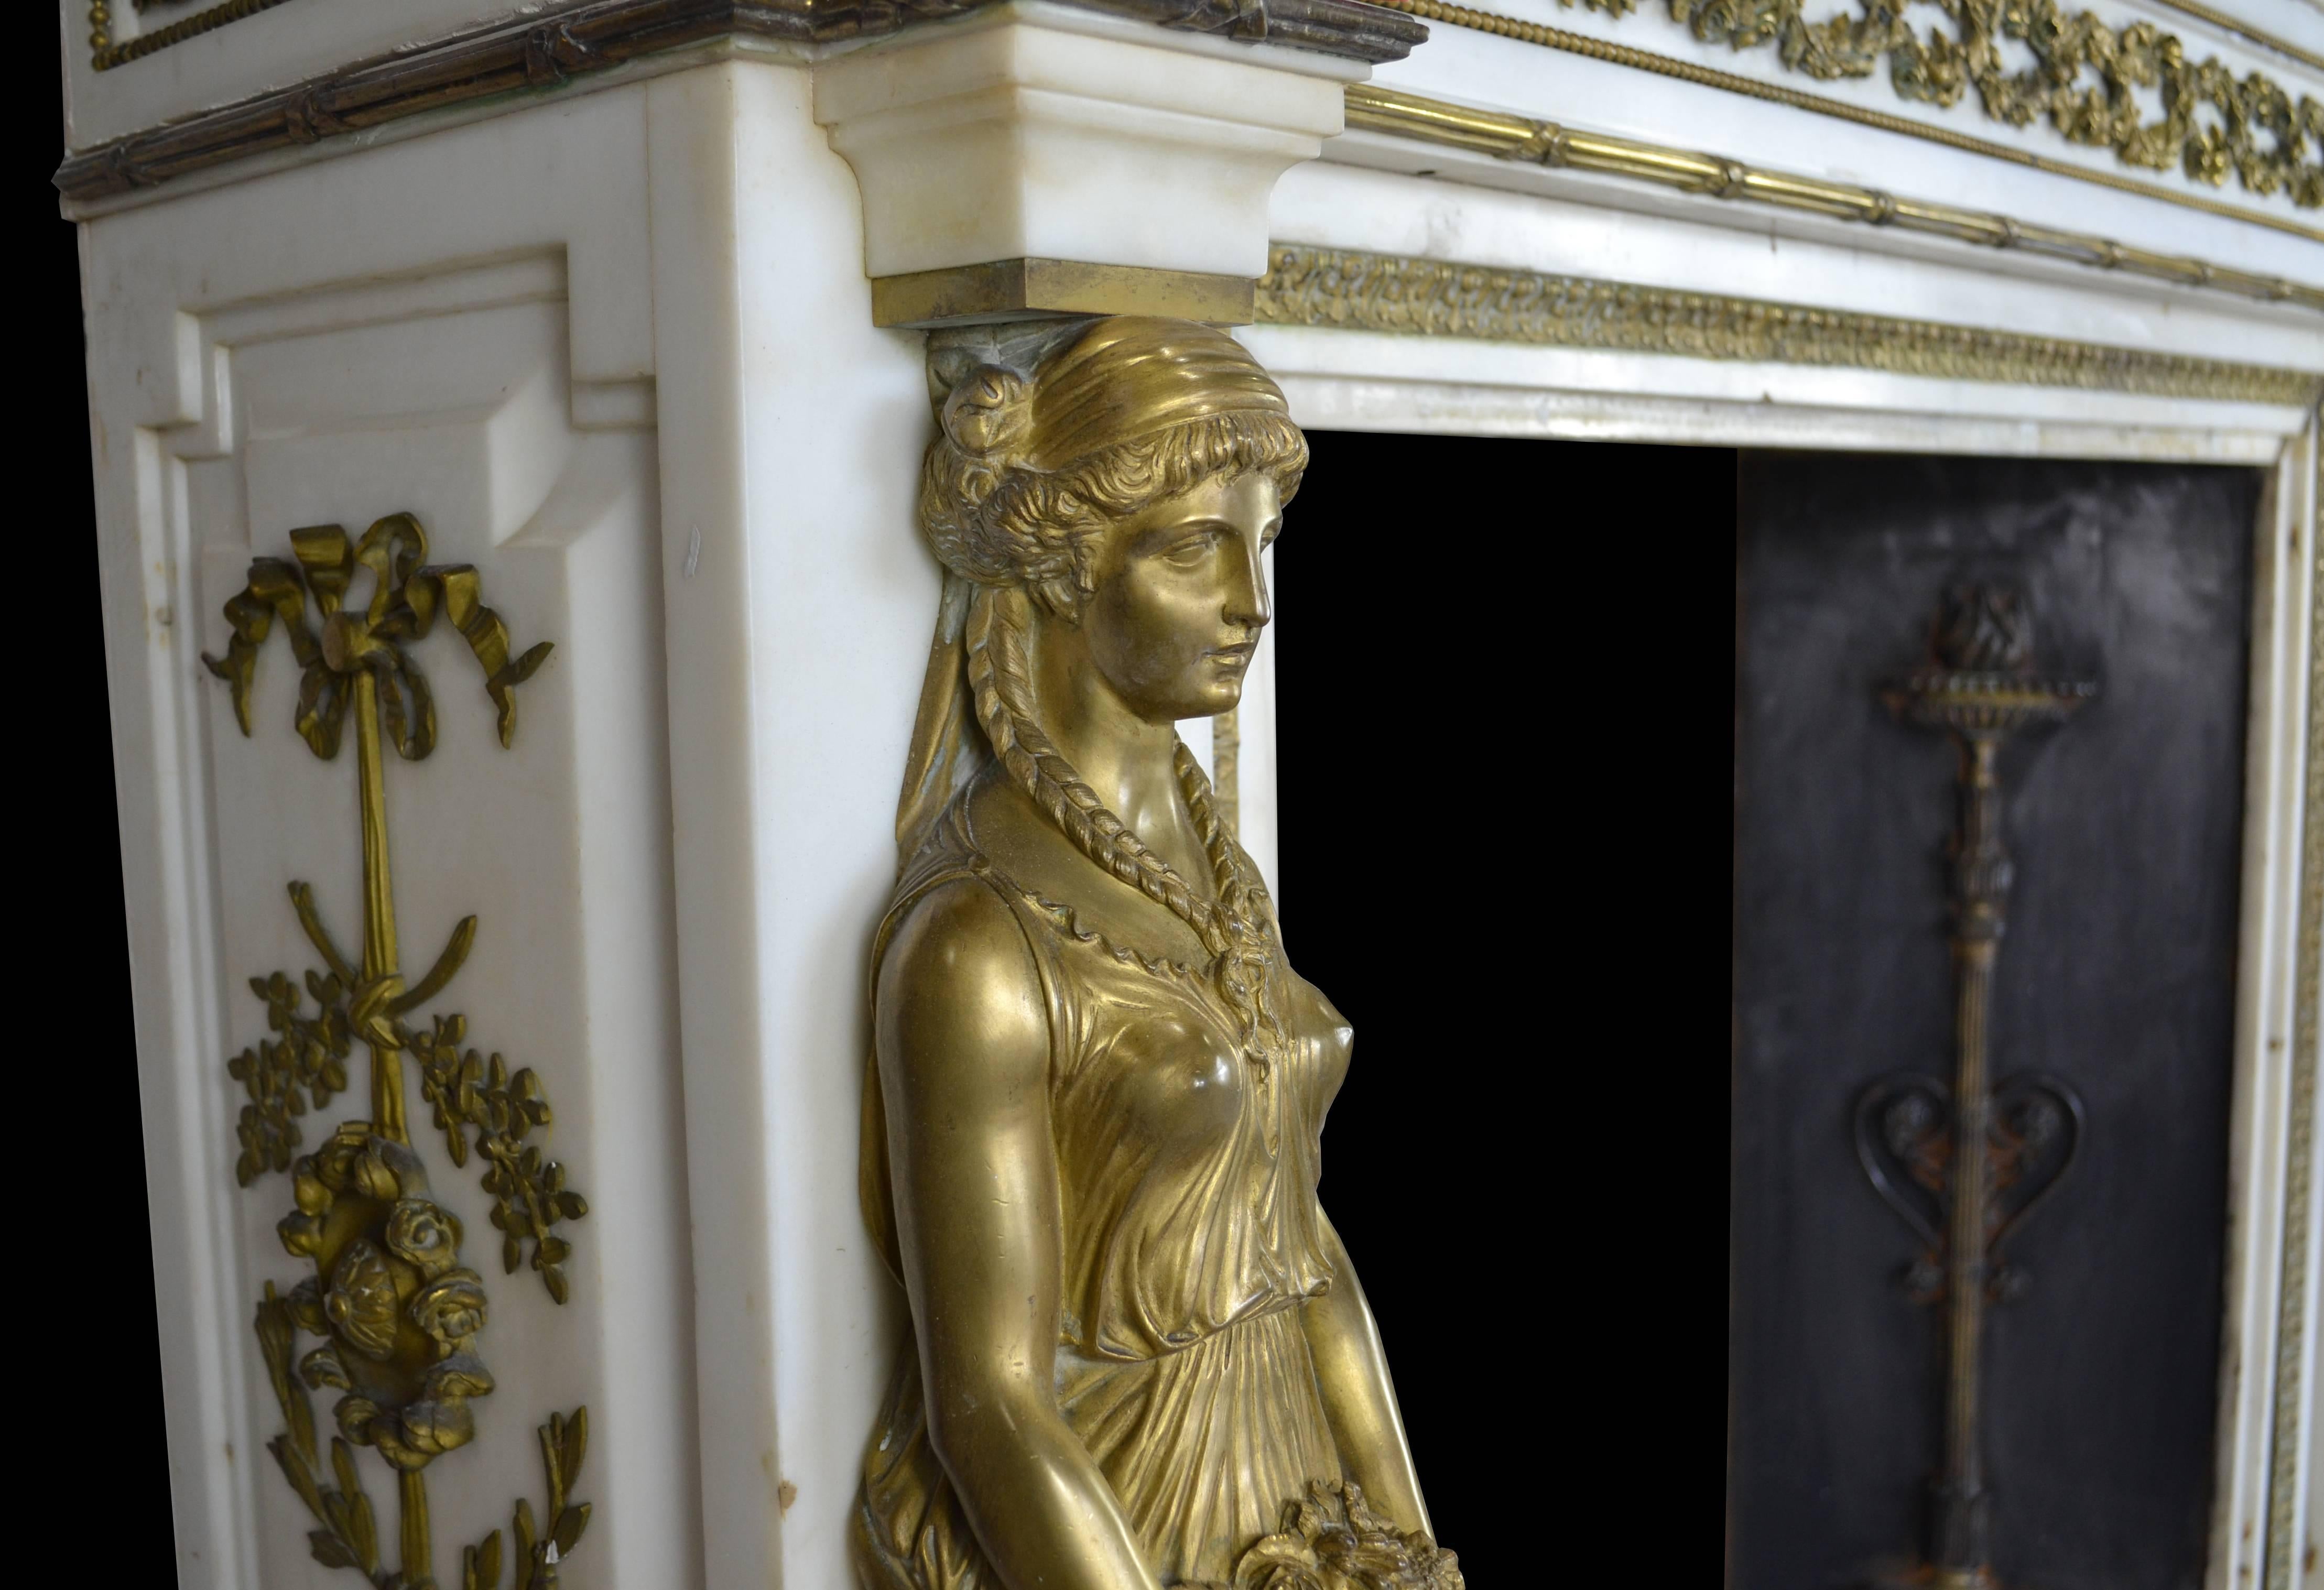 A 19th century Empire style French mantel of outstanding quality. In flawless Italian statuary marble with very fine ormolu decoration the mantel displays a wealth of decorative detail unique in a piece of such modest dimensions.

The jambs have